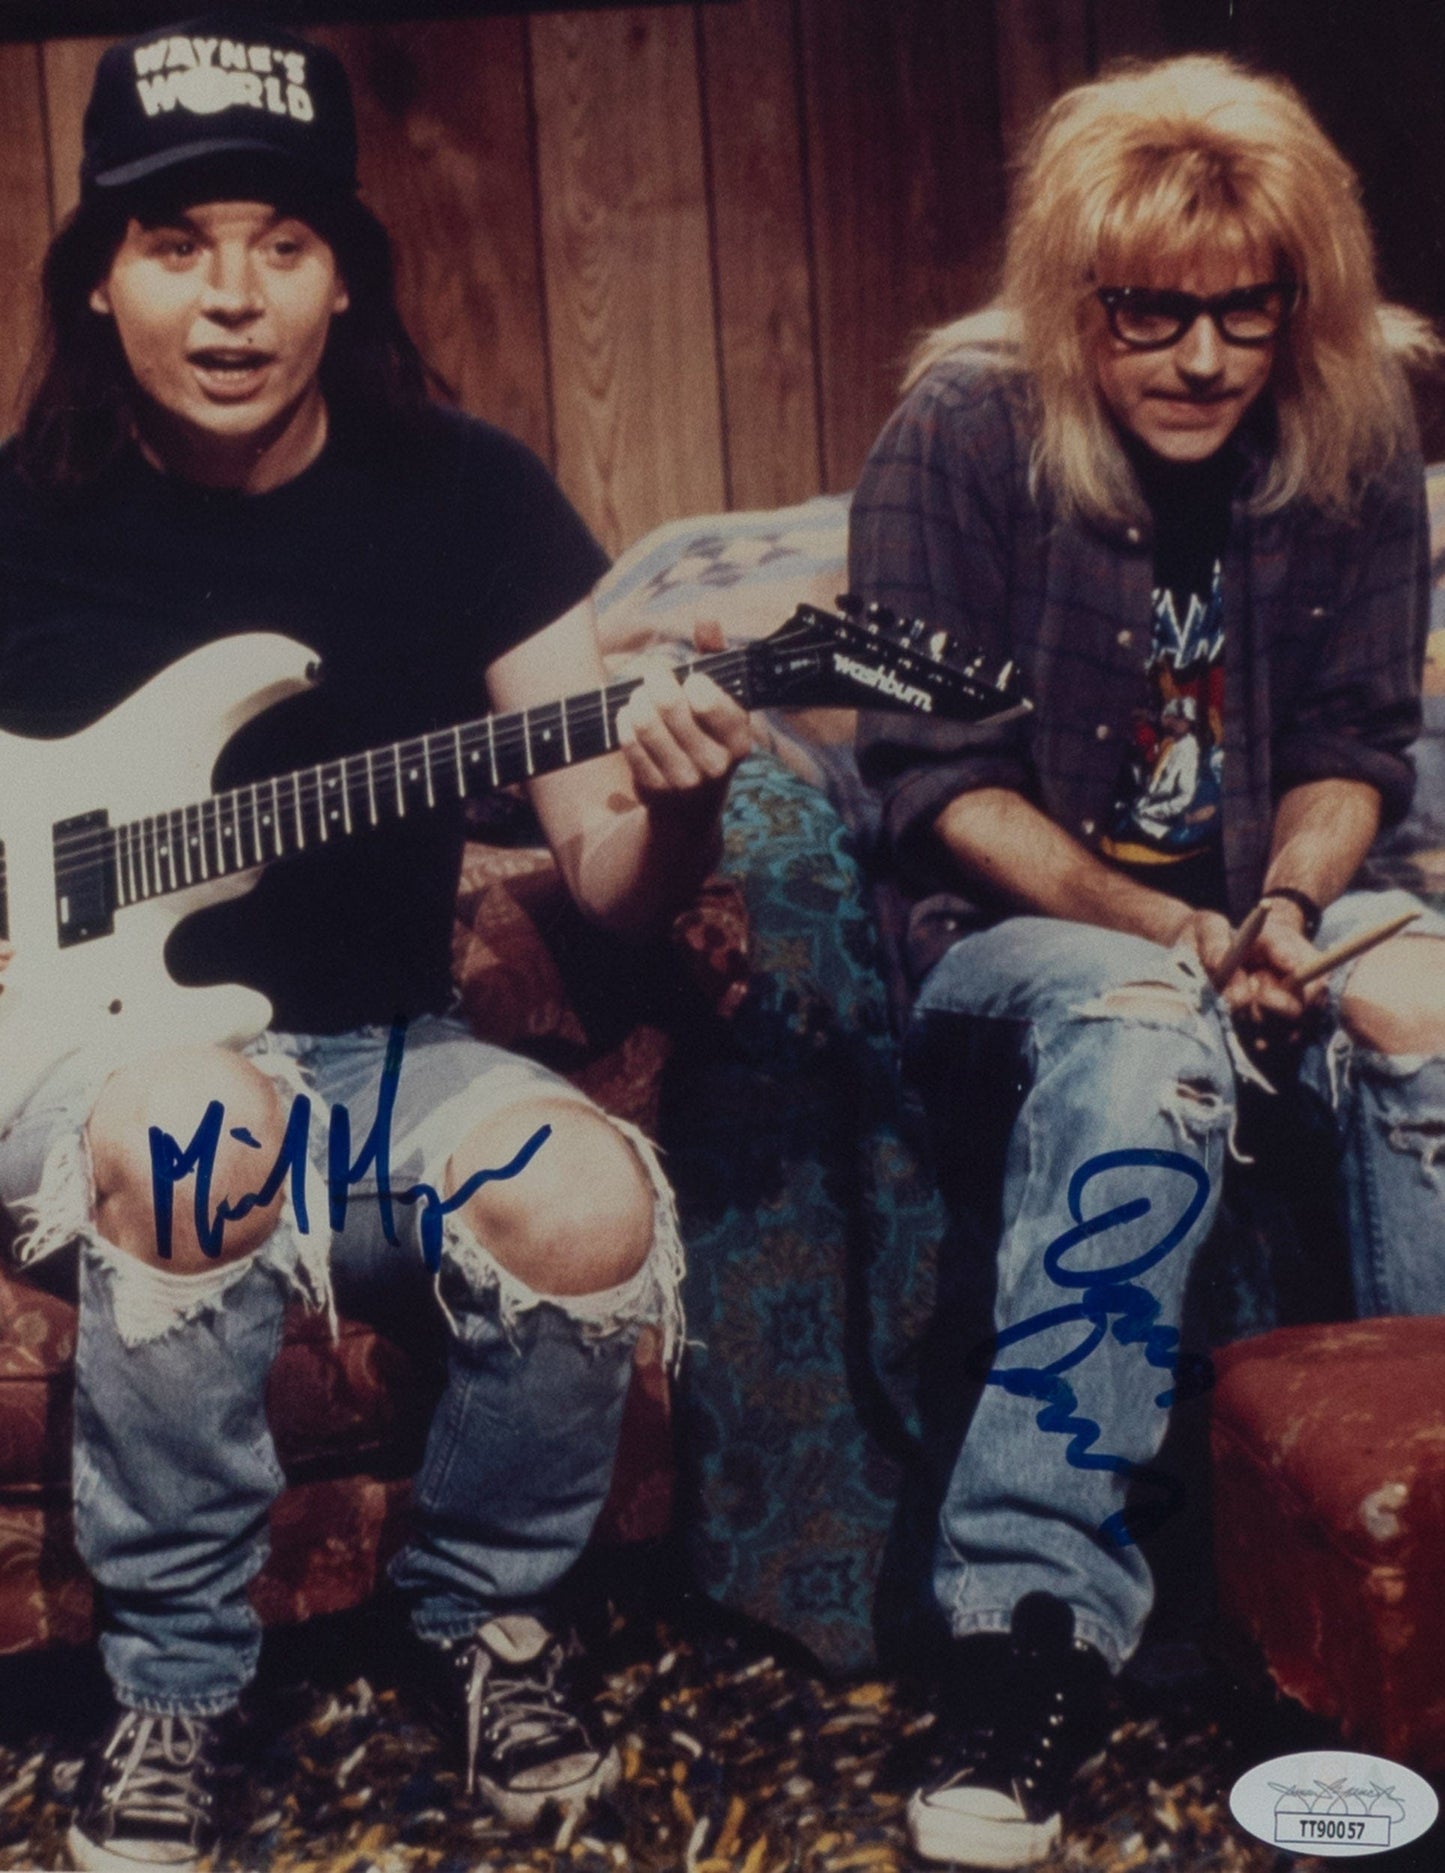 Wayne's World Movie Menorabilia - Signed by Mike Myers and Dana Carvey Autograph